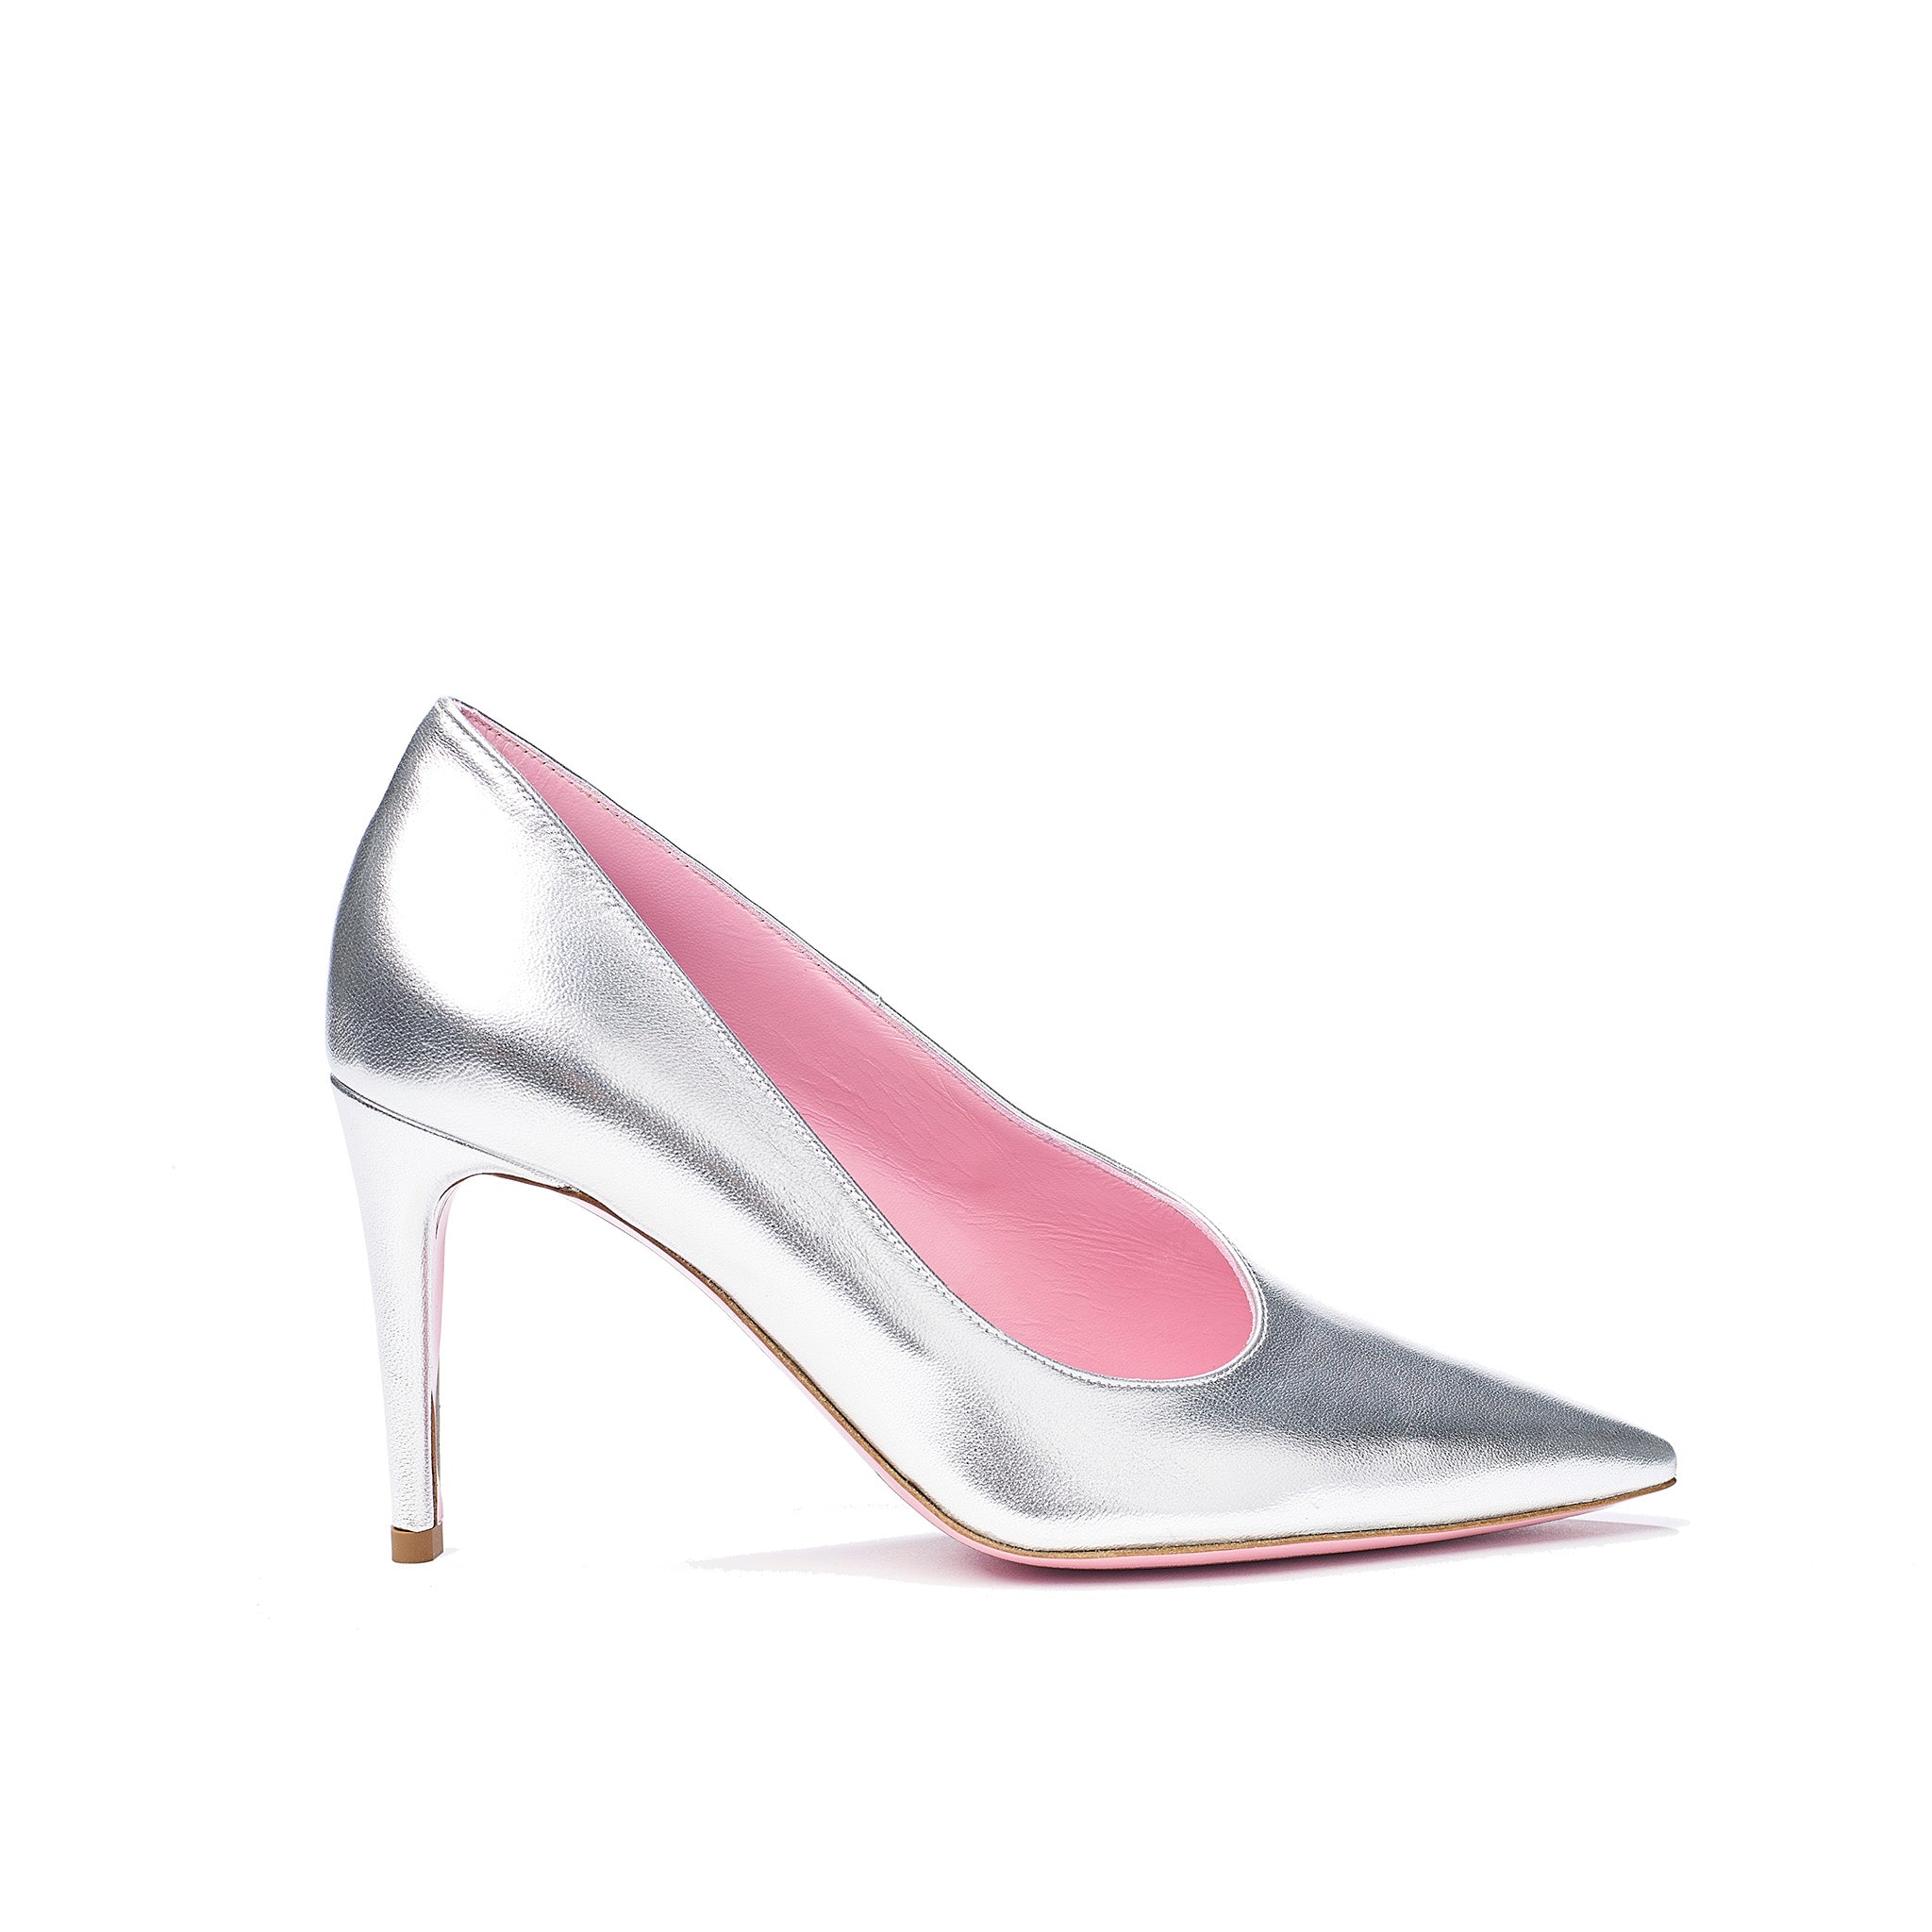 Phare asymmetrical pump in metallic silver leather